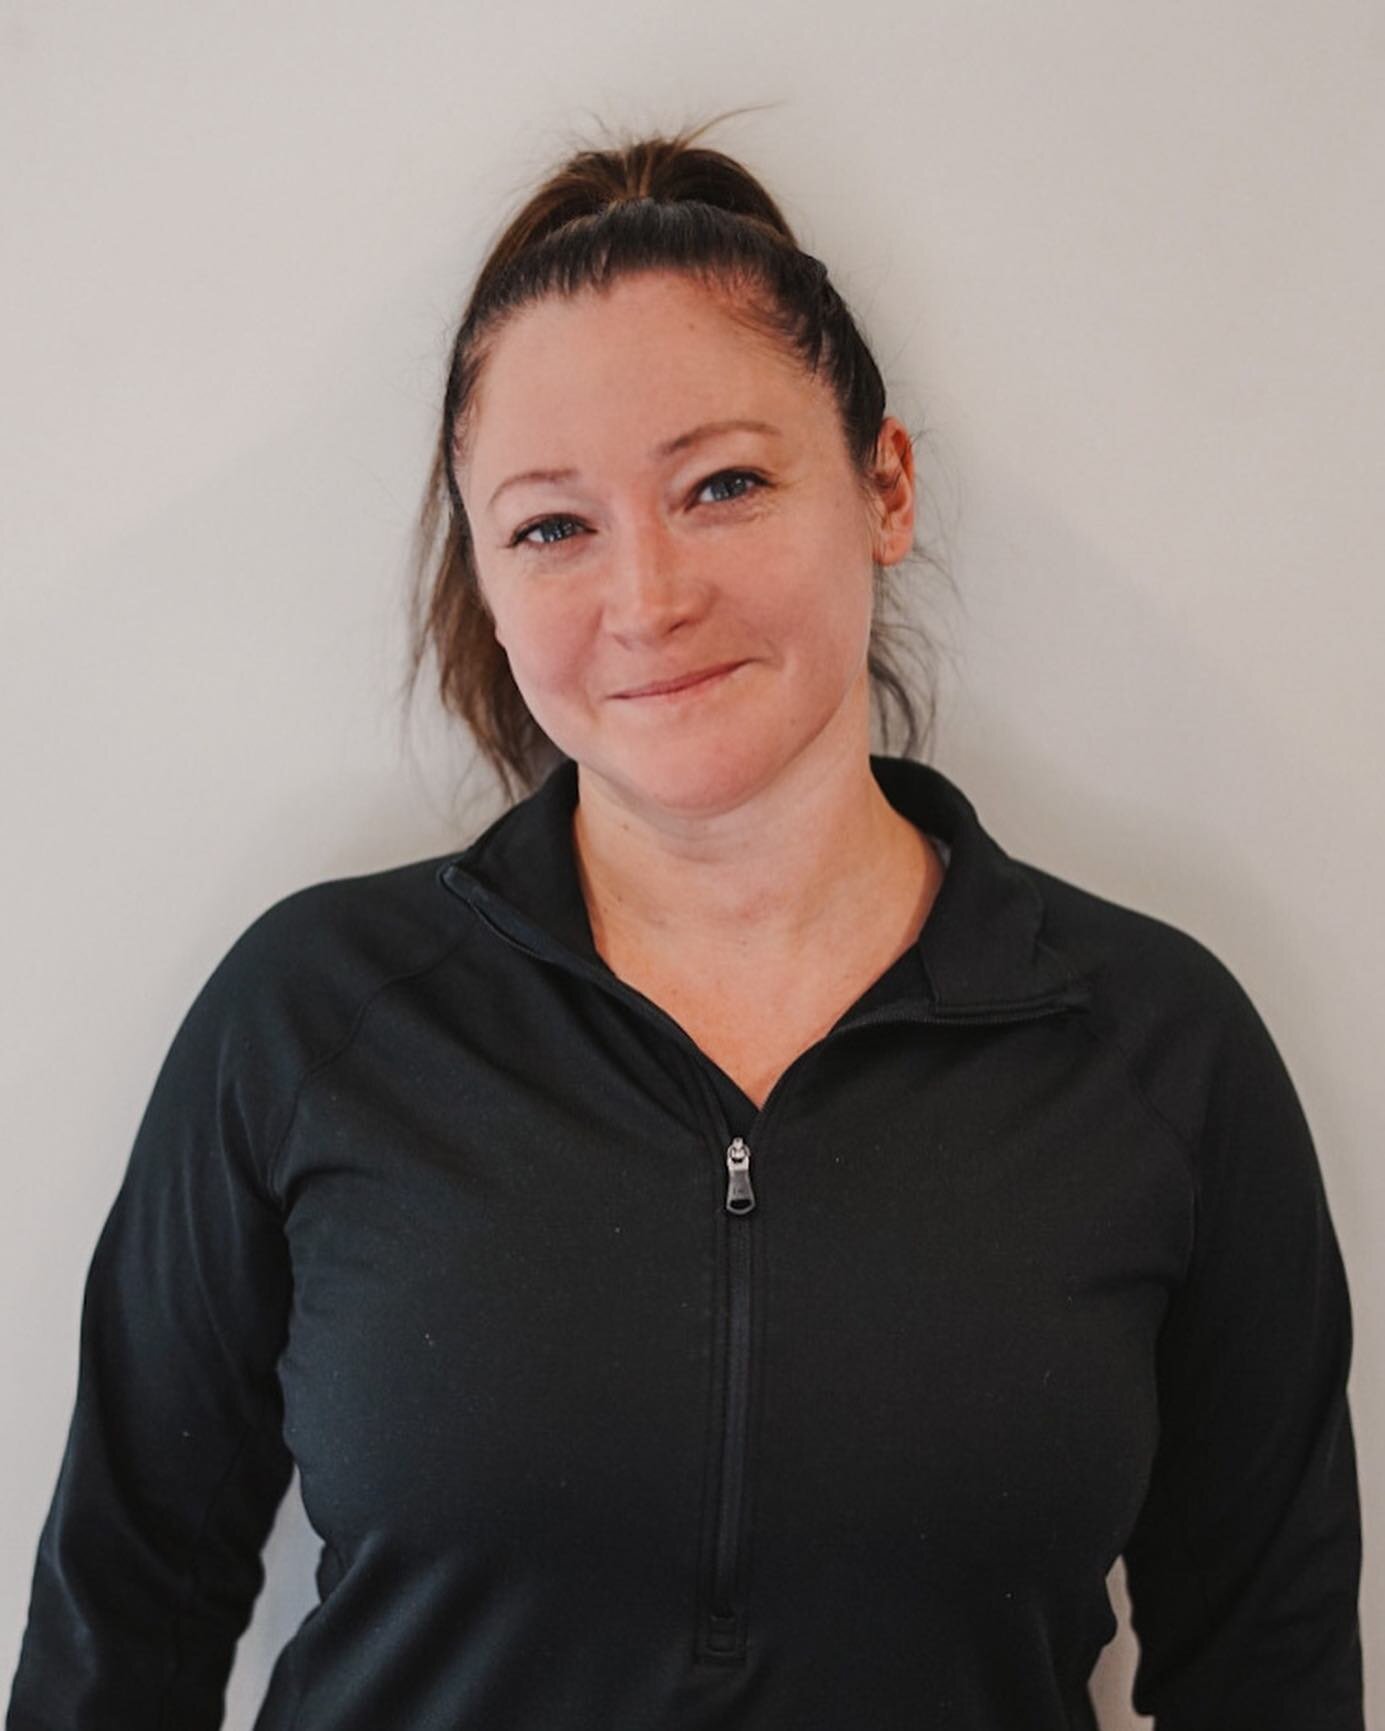 NEW YEAR, NEW FACES! Please help us welcome Kristi to the PNF family. Swipe right to learn more!
.
.
.
.
.
.
.
.
#personaltraining #personaltrainer #gym #training #workout #health #motivation #weightloss #fitnessmotivation #strength #fitness #fit #fi